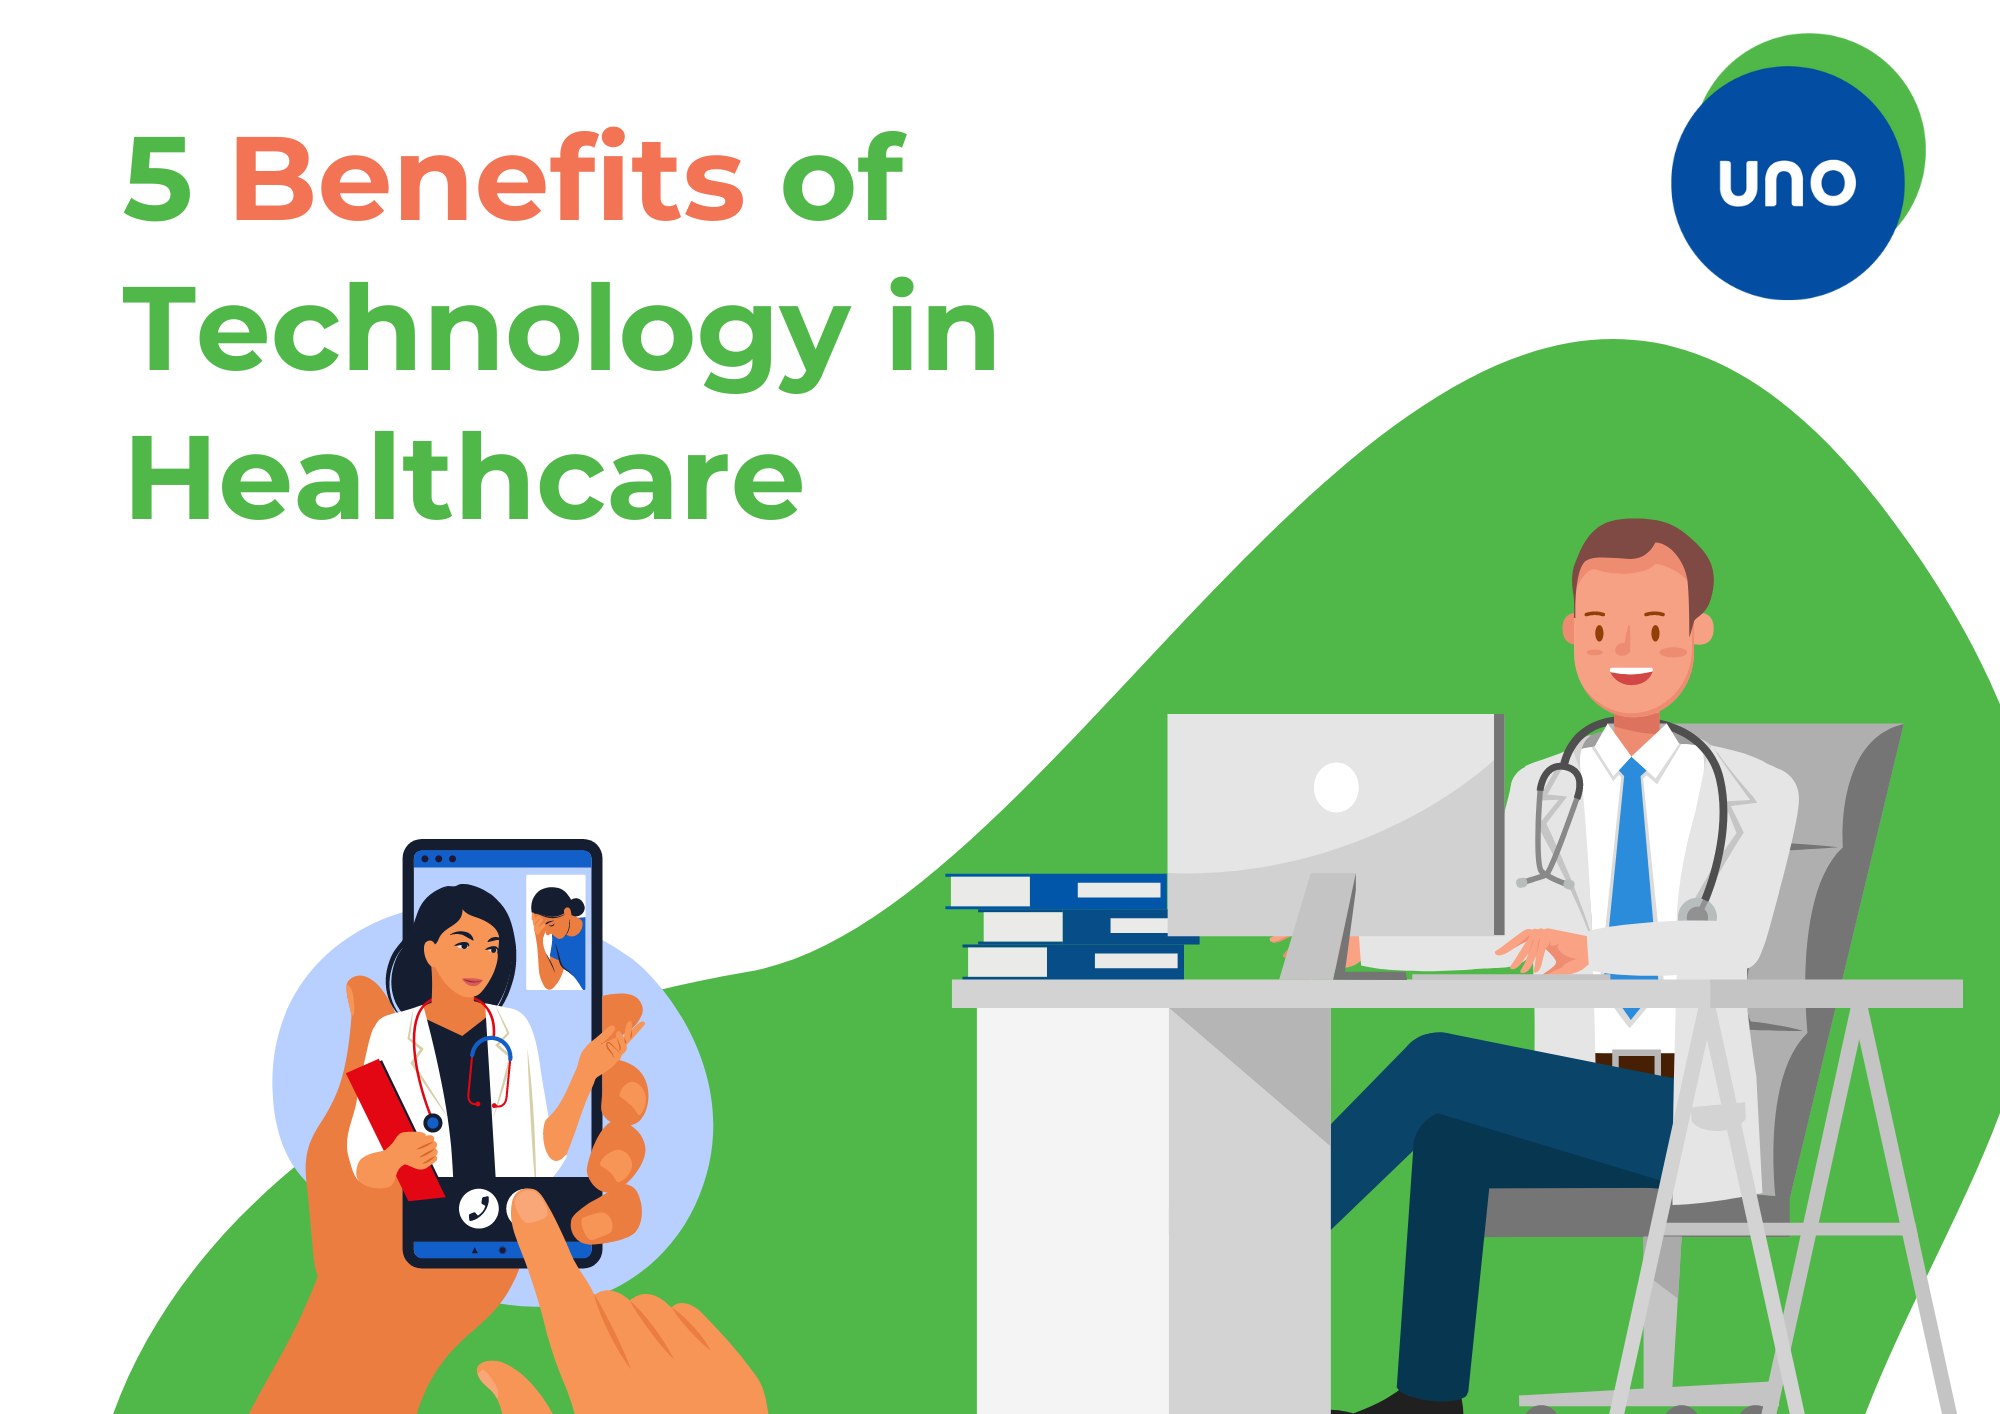 UNO Technologies - 5 benefits of technology in healthcare